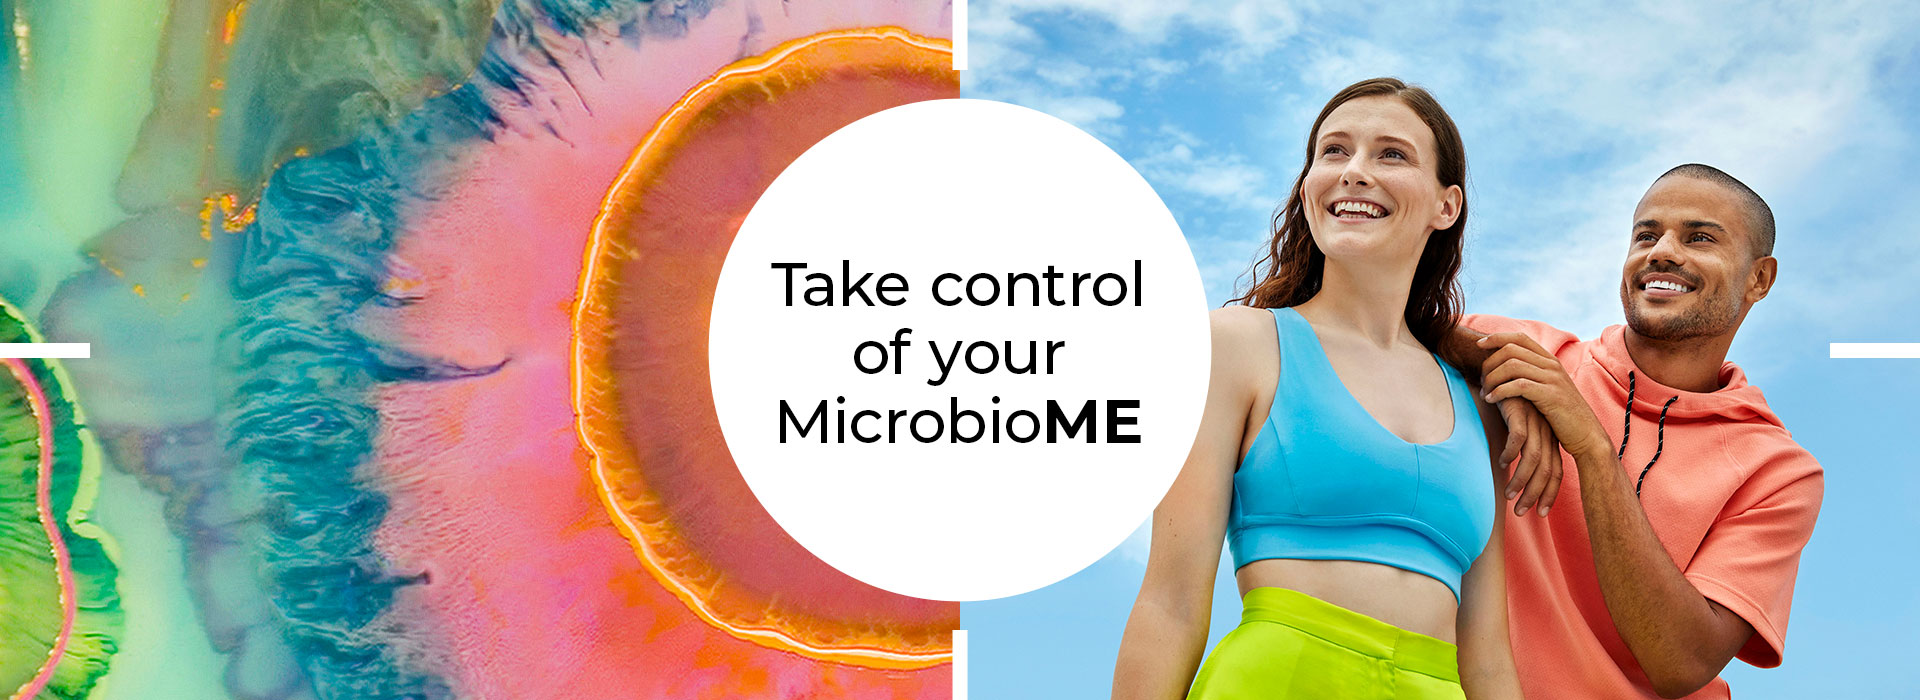 Take control of your MicrobioME